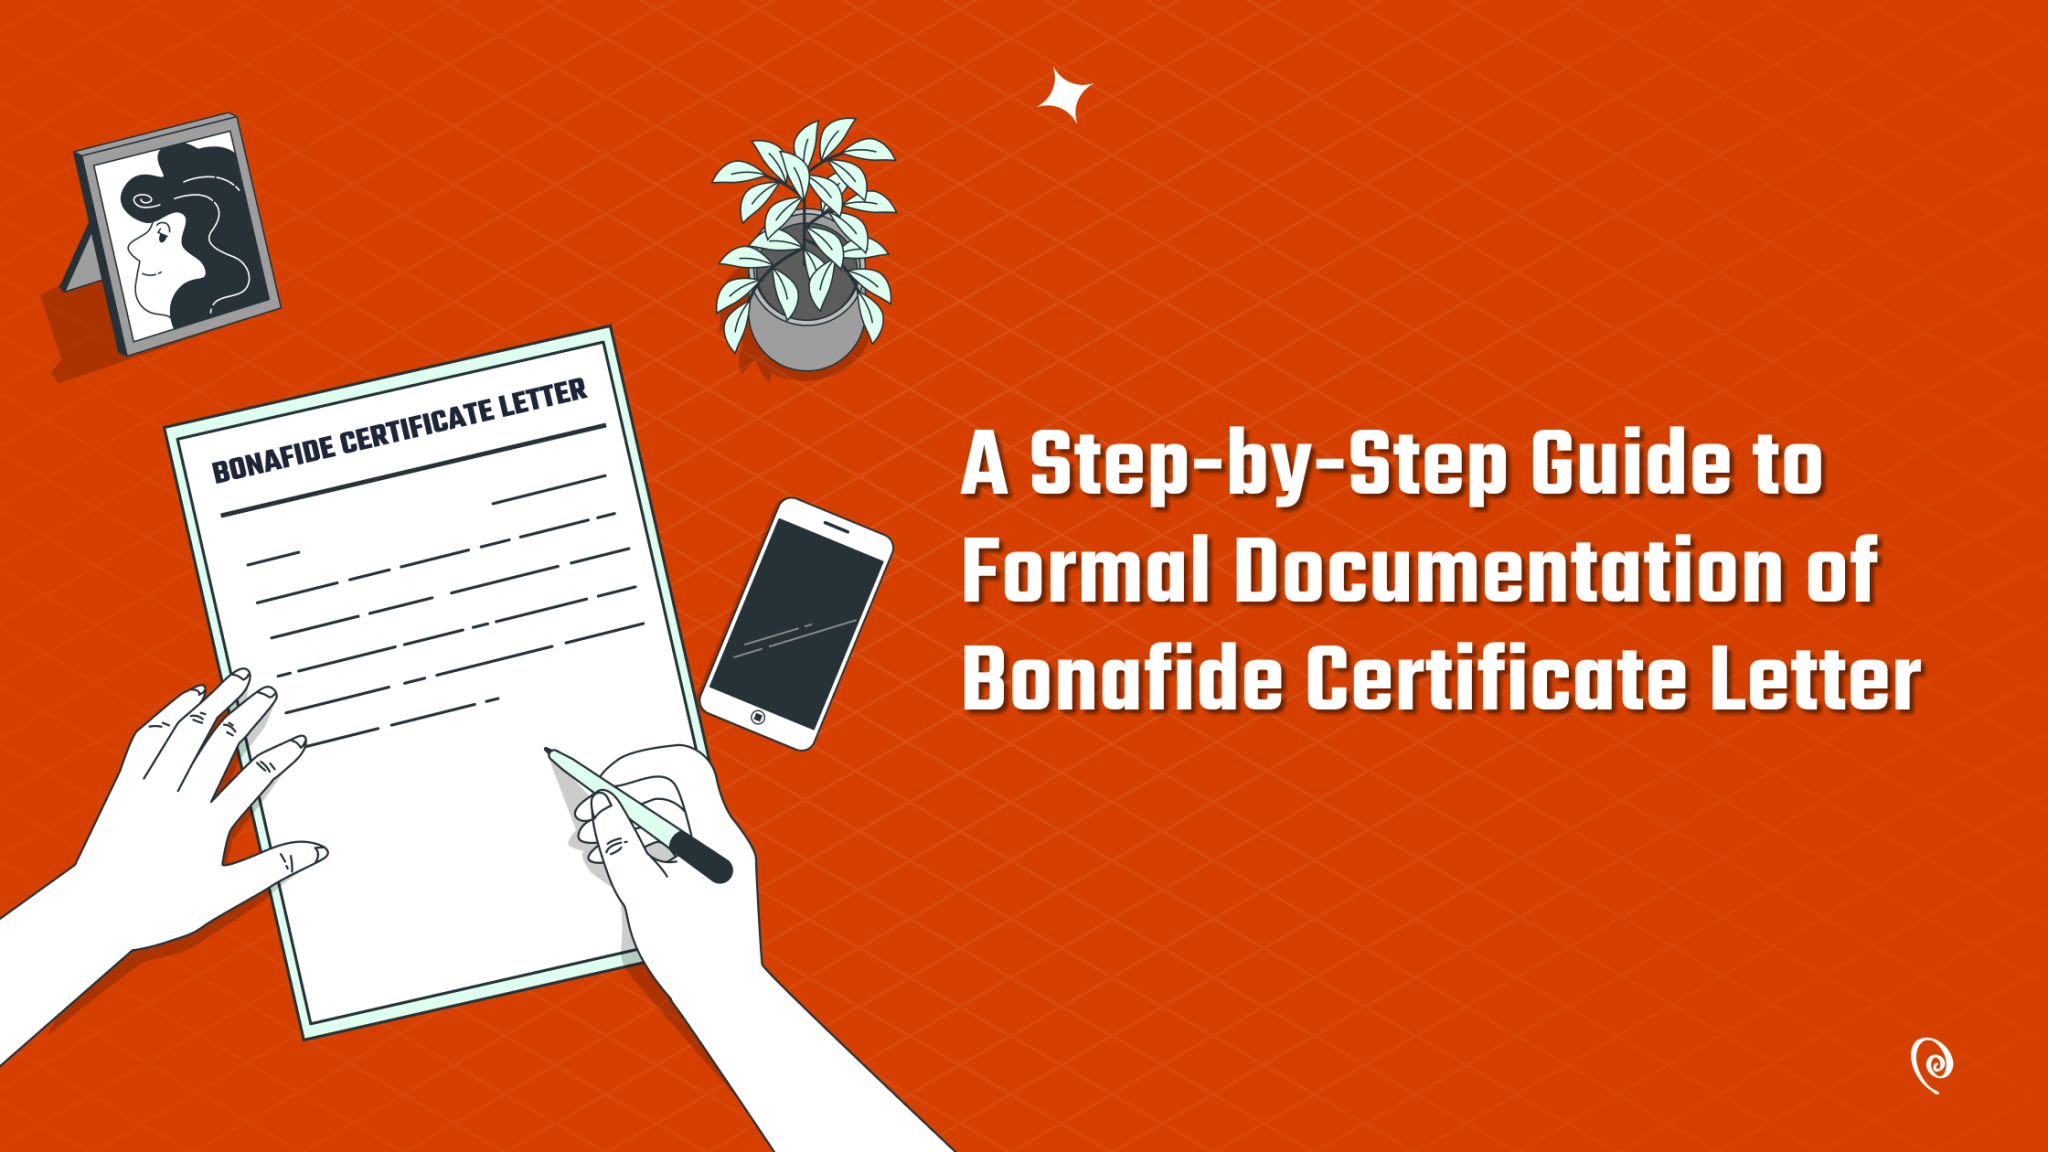 What is Bonafide Certificate & Why It is Required?